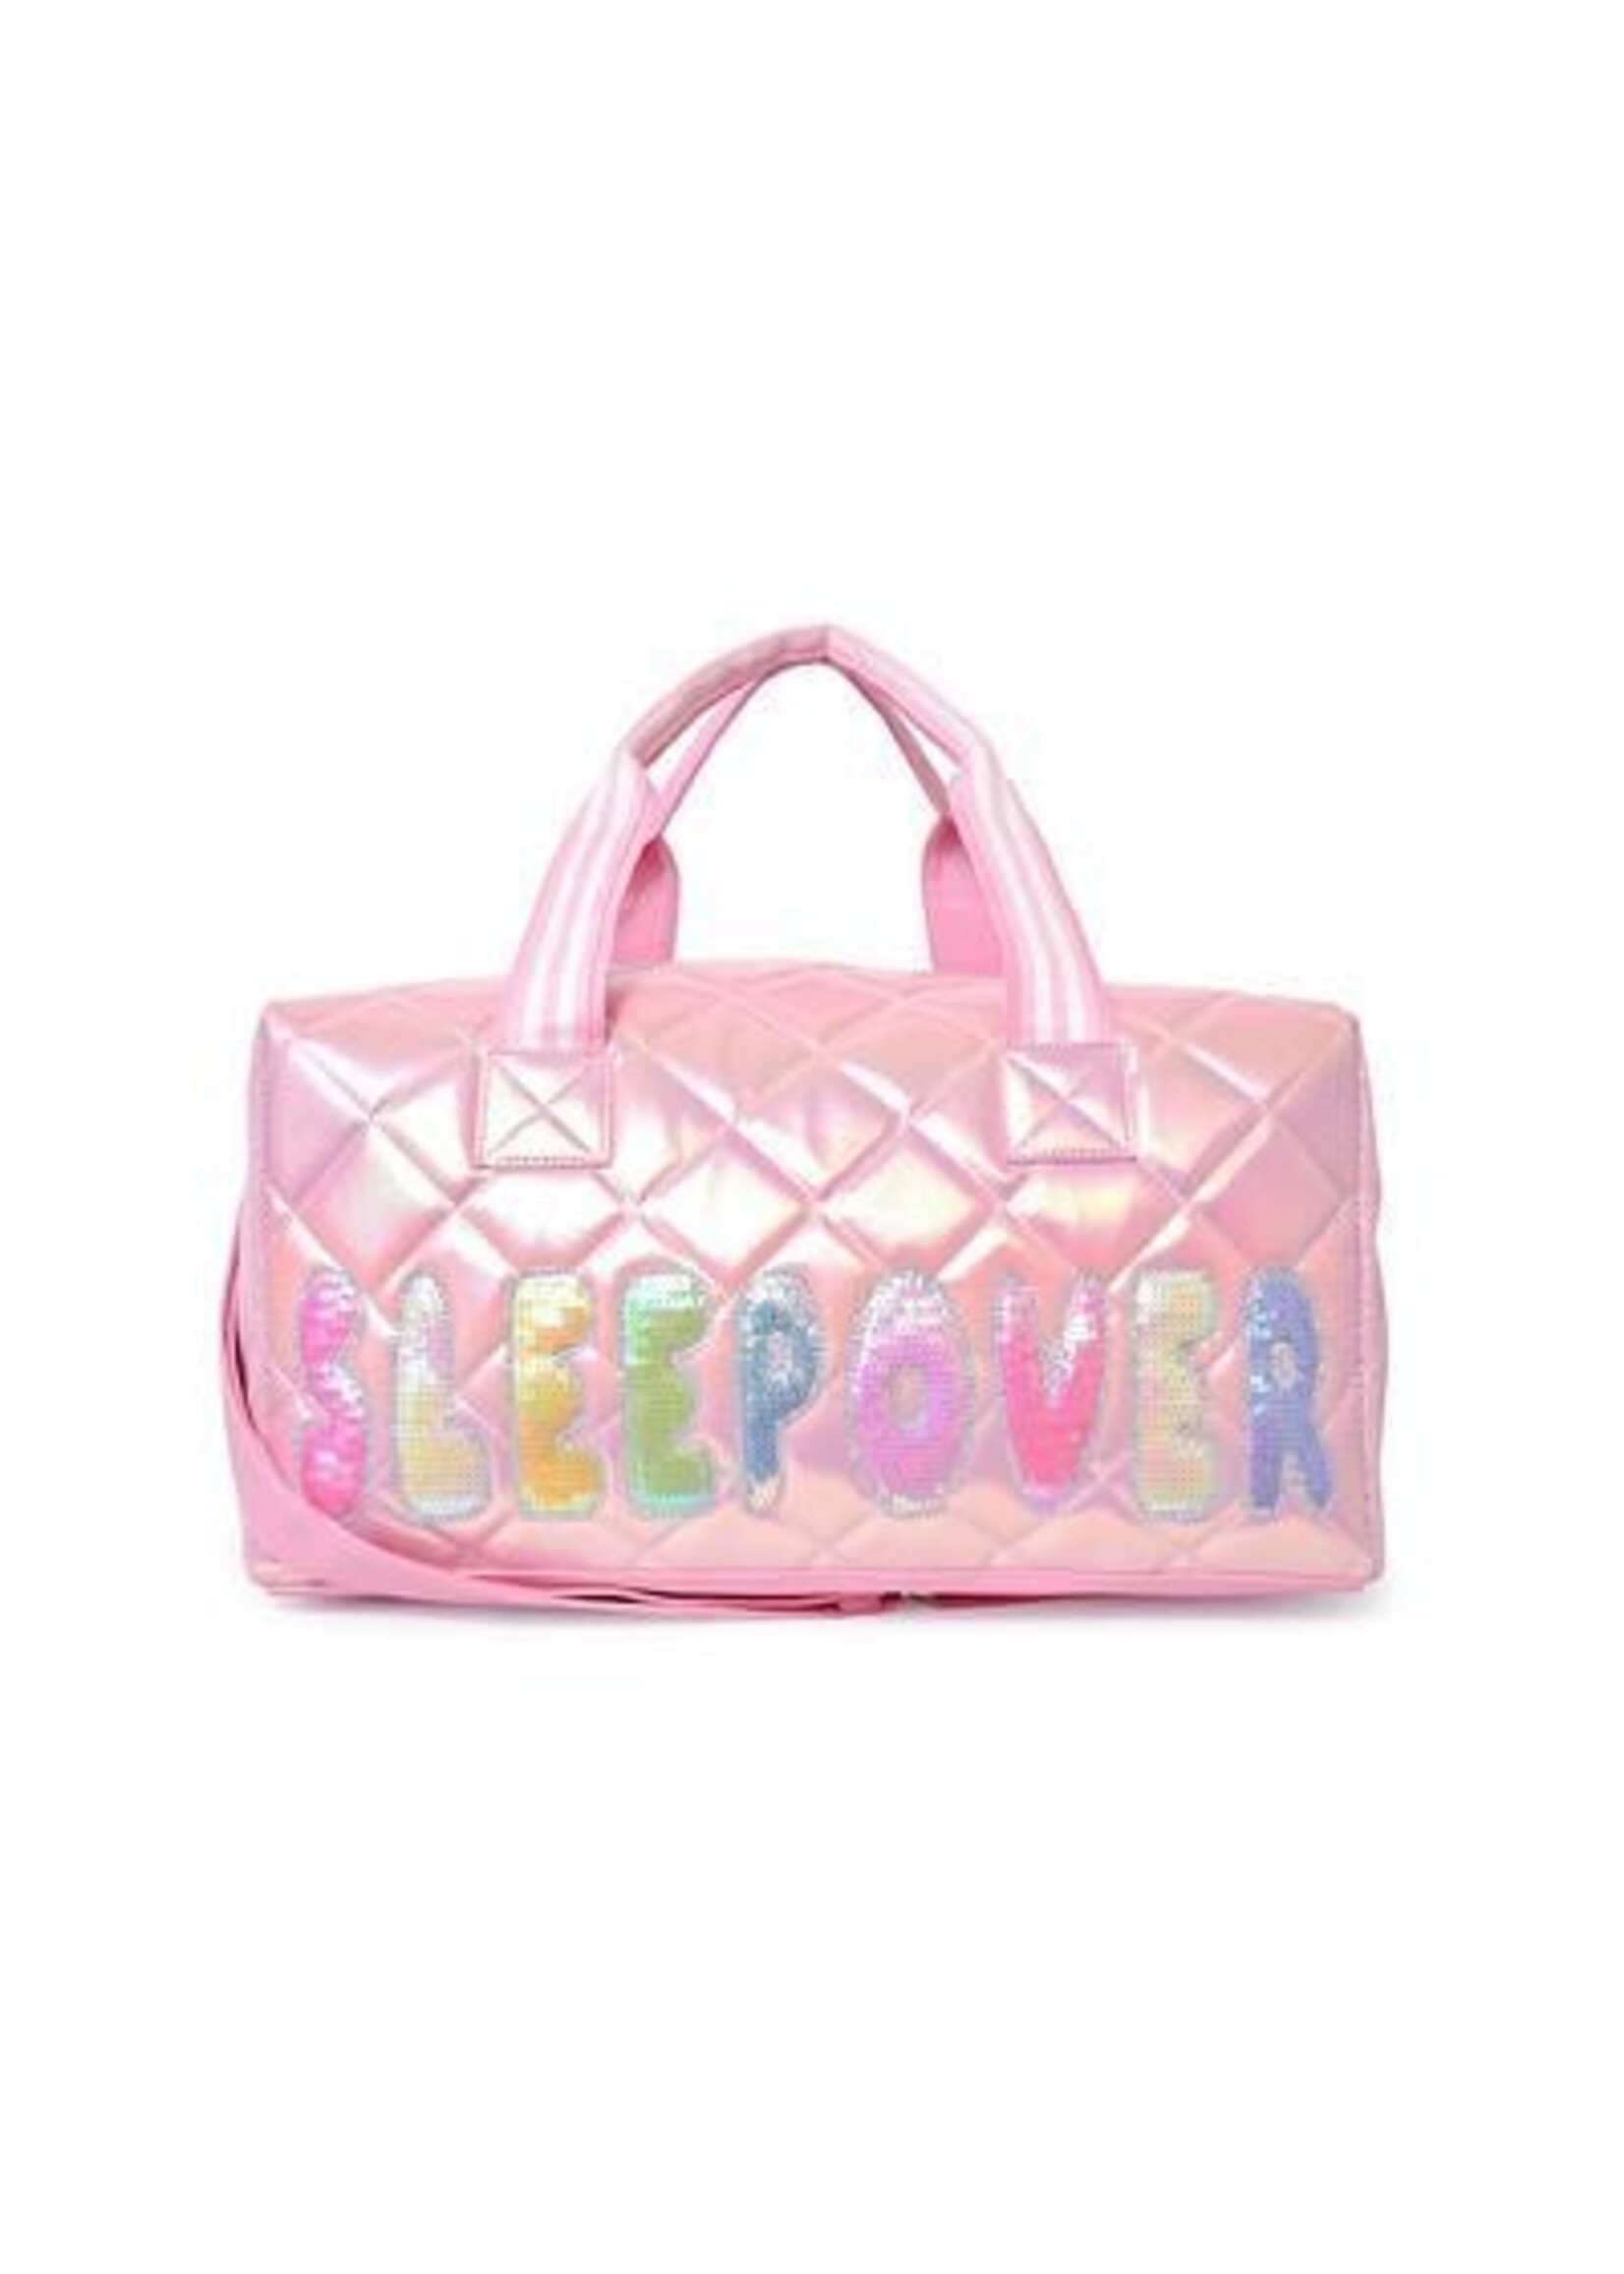 OMG Accessories OMG Accessories Pink Quilted Sleepover Bag